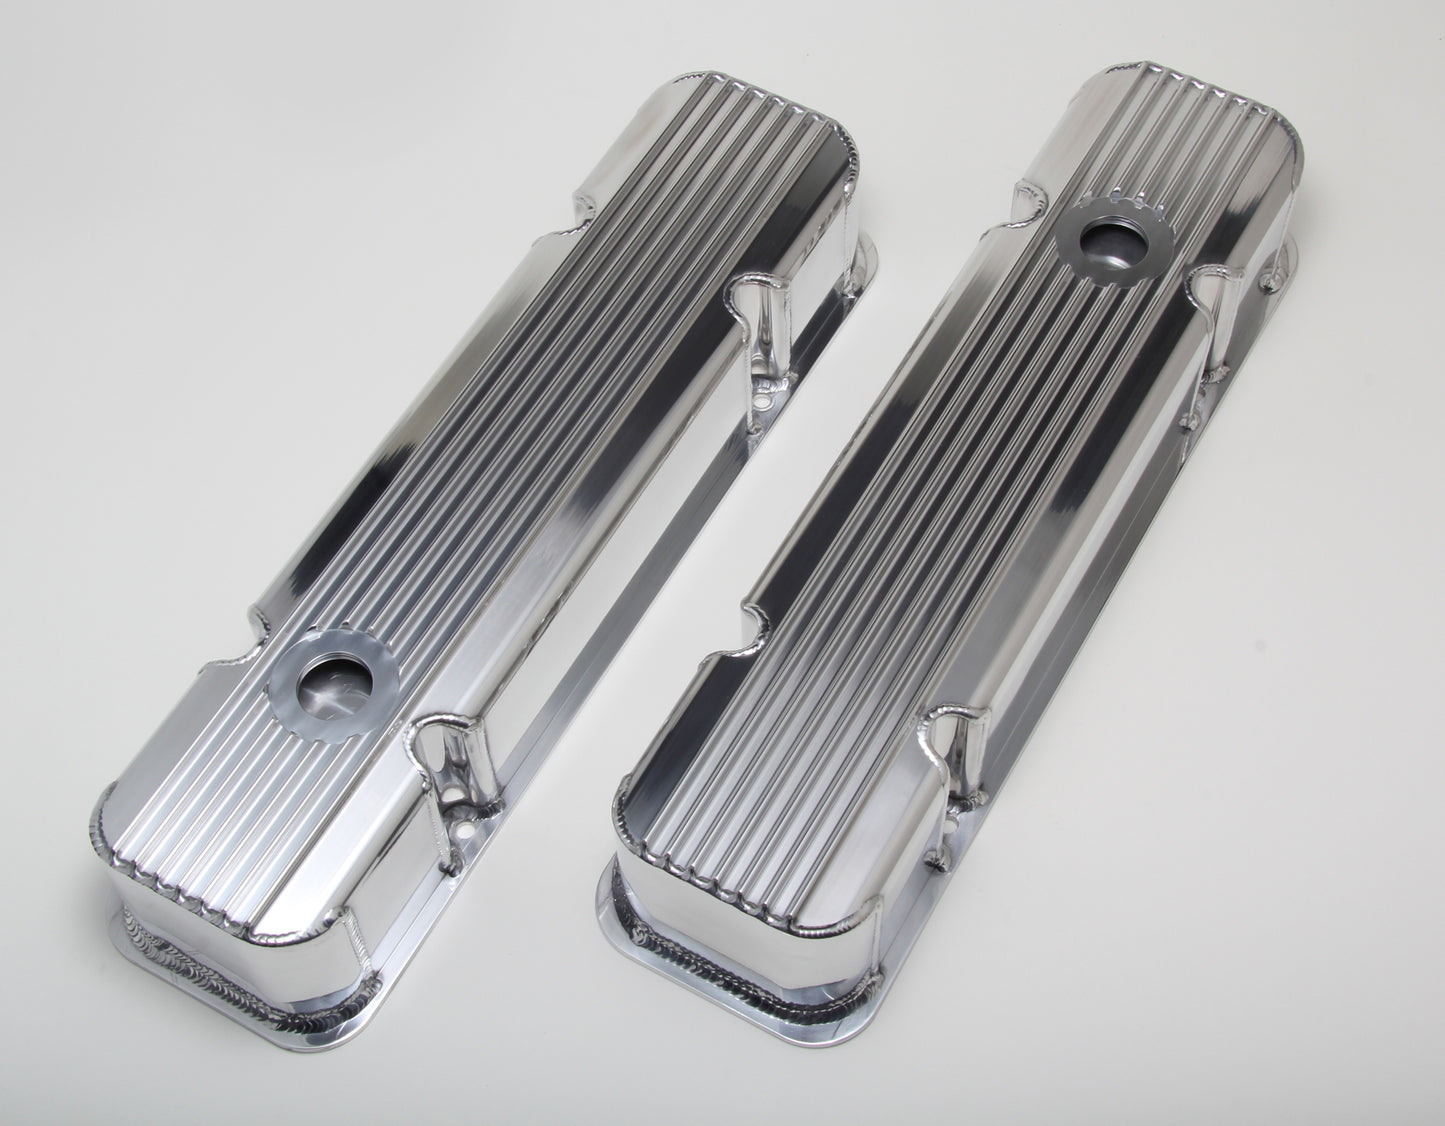 HAMBURGER'S PERFORMANCE PRODUCTS FABRICATED ALUMINUM VALVE COVERS WITH FINS; PONTIAC 326-455 V8; 1959-79; WITH HOLES- CHROME/ALUMINUM 1129